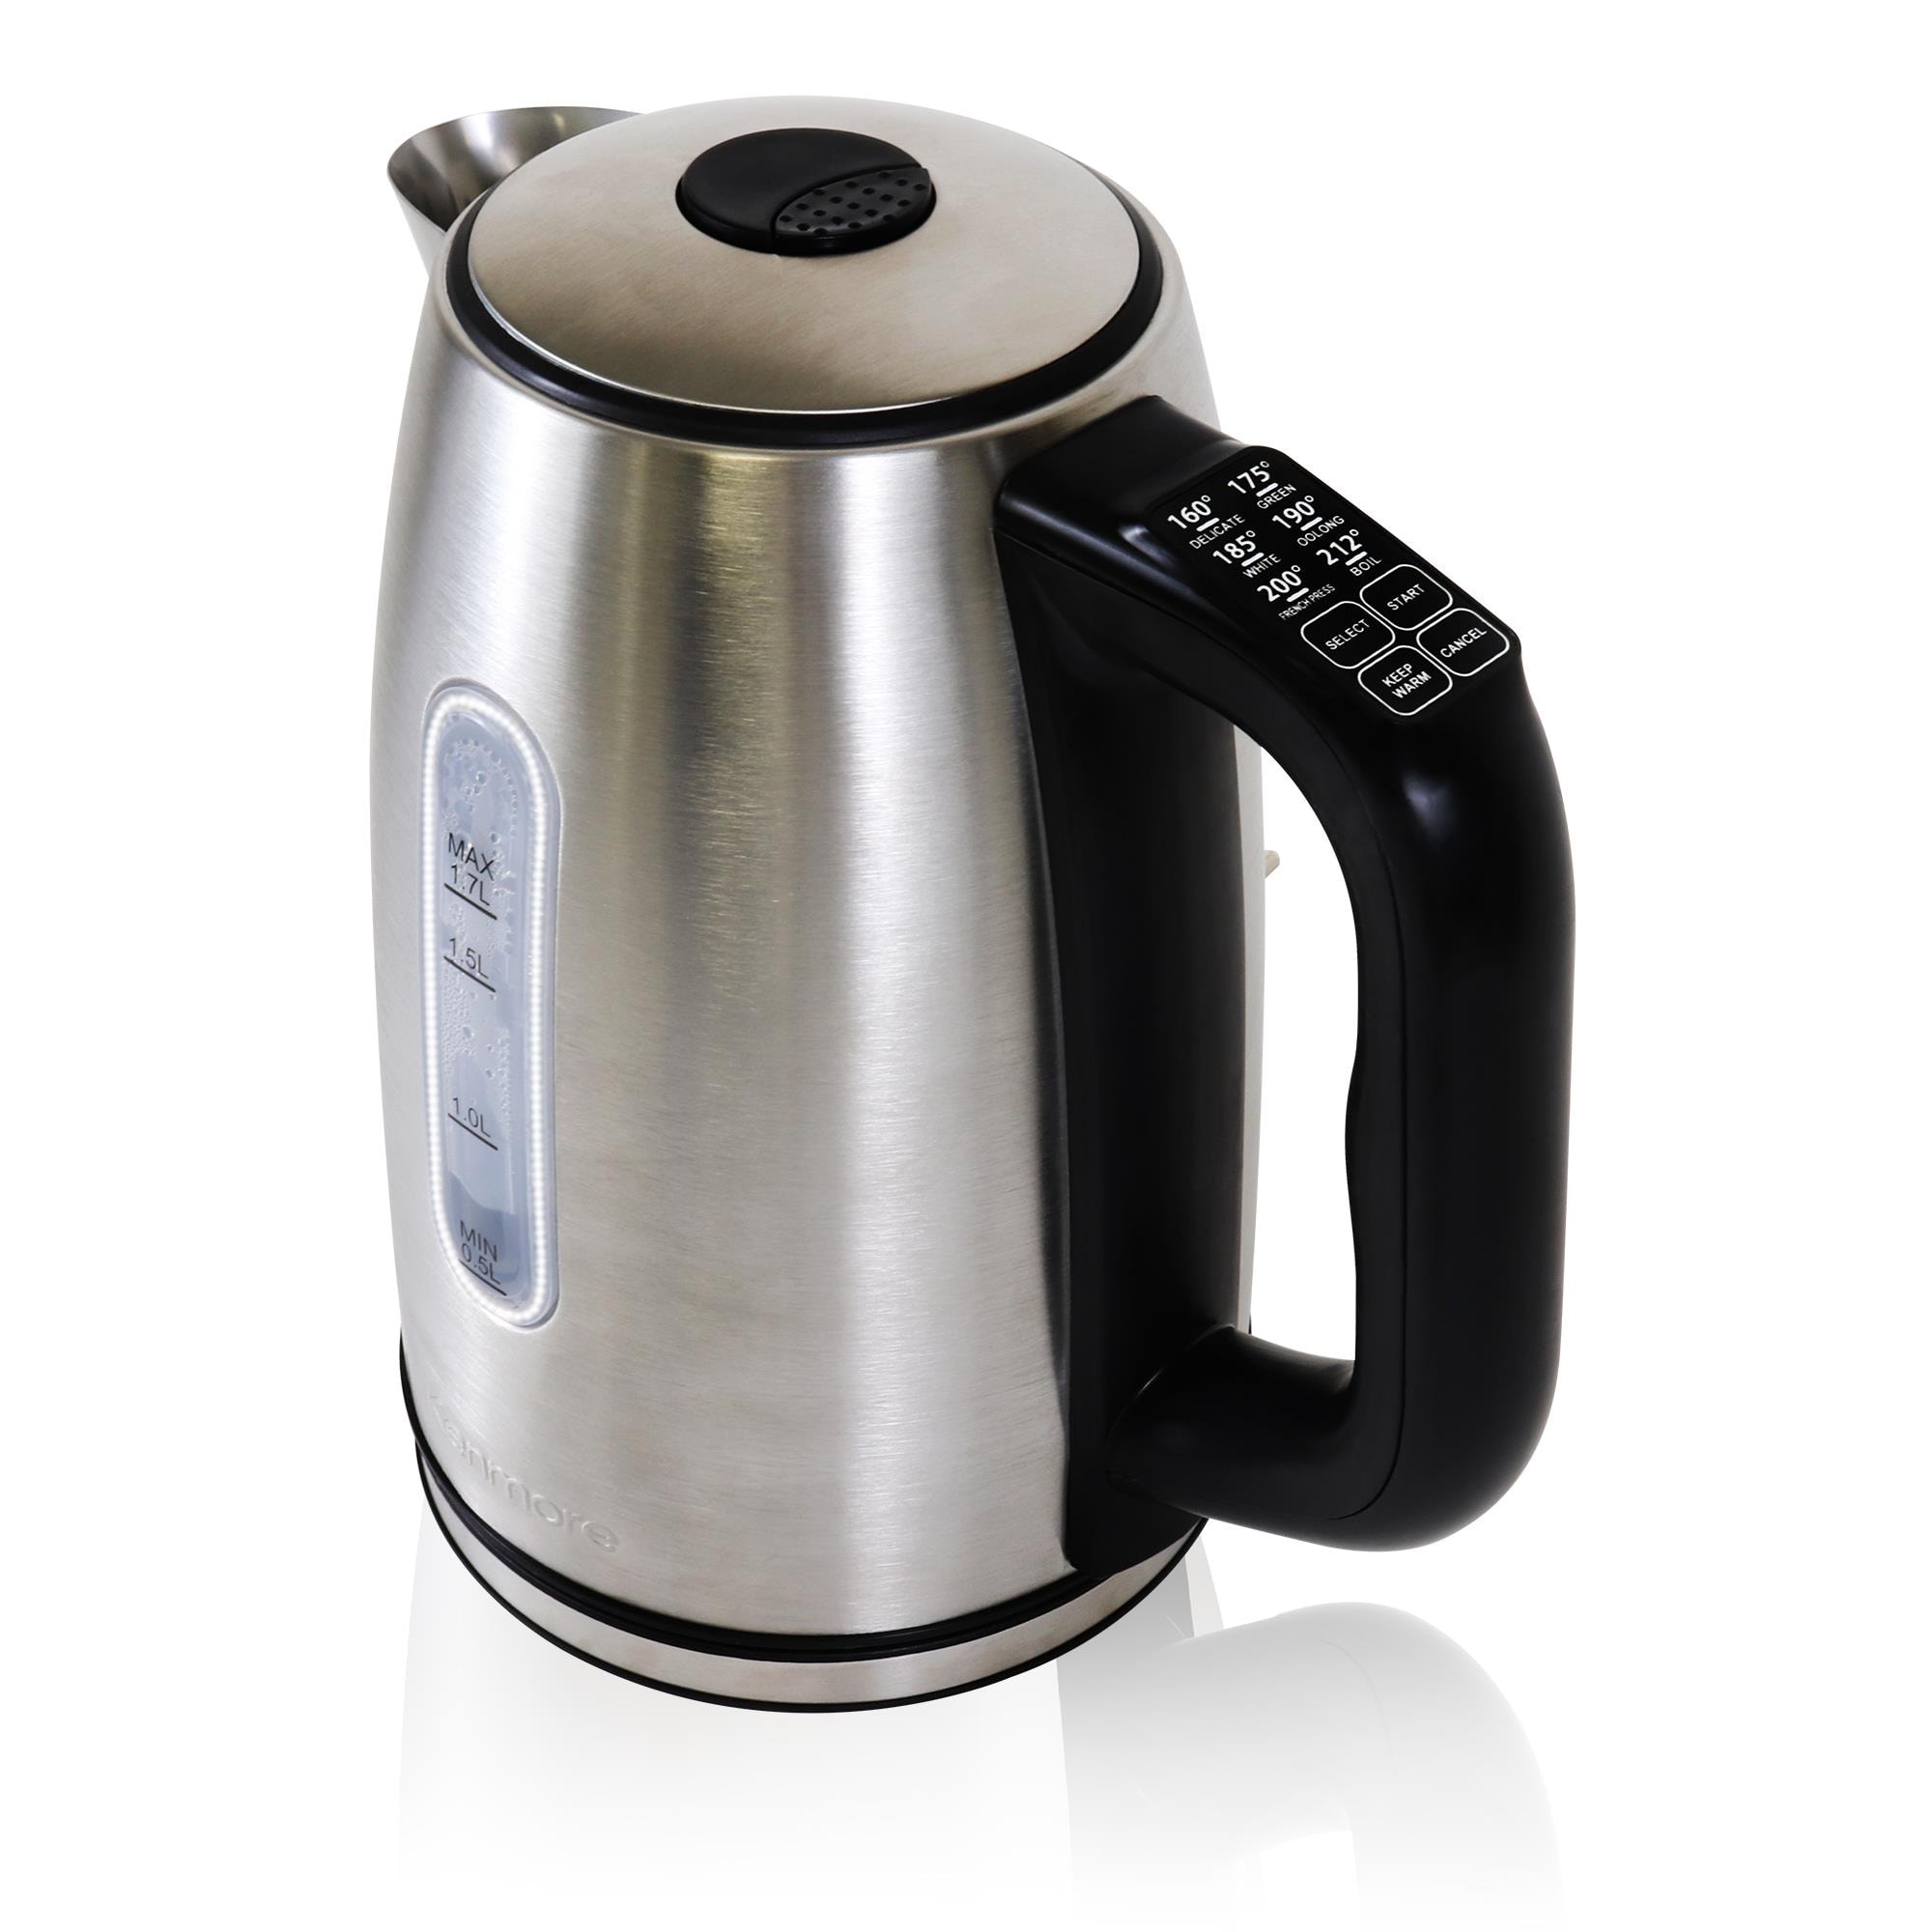 Cosori 1.7L Electric Kettle with Upgraded 100% Stainless Steel Filter,Inner Lid & Bottom,Glass Water Boiler & Tea Heater with LED Indicator, Auto Shut